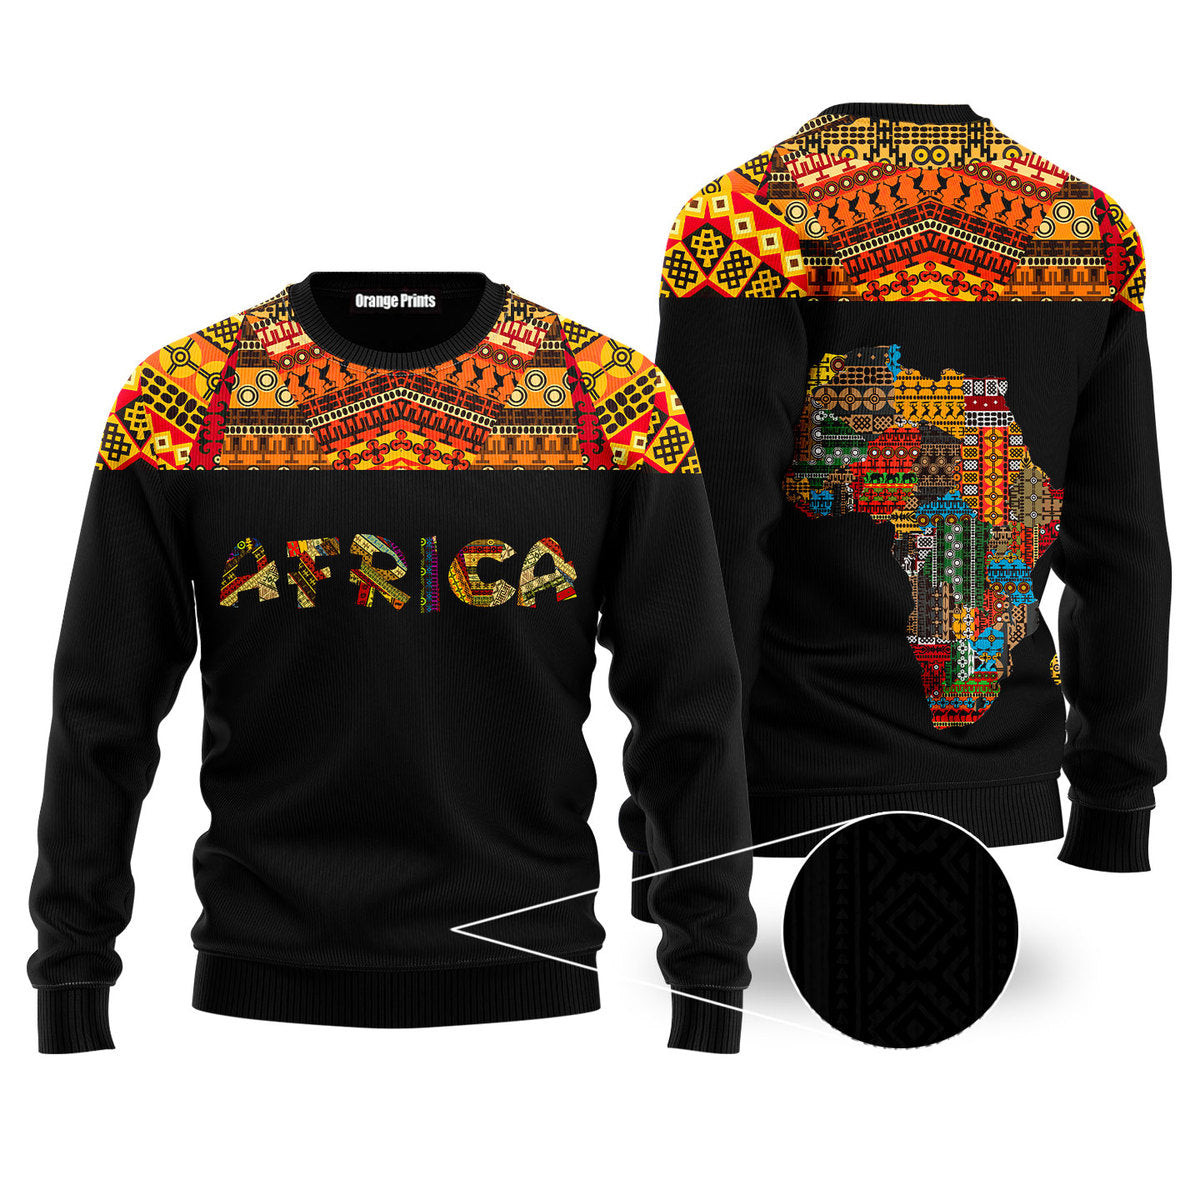 Colorful Africa Vintage Ugly Christmas Sweater Ugly Sweater For Men Women, Holiday Sweater